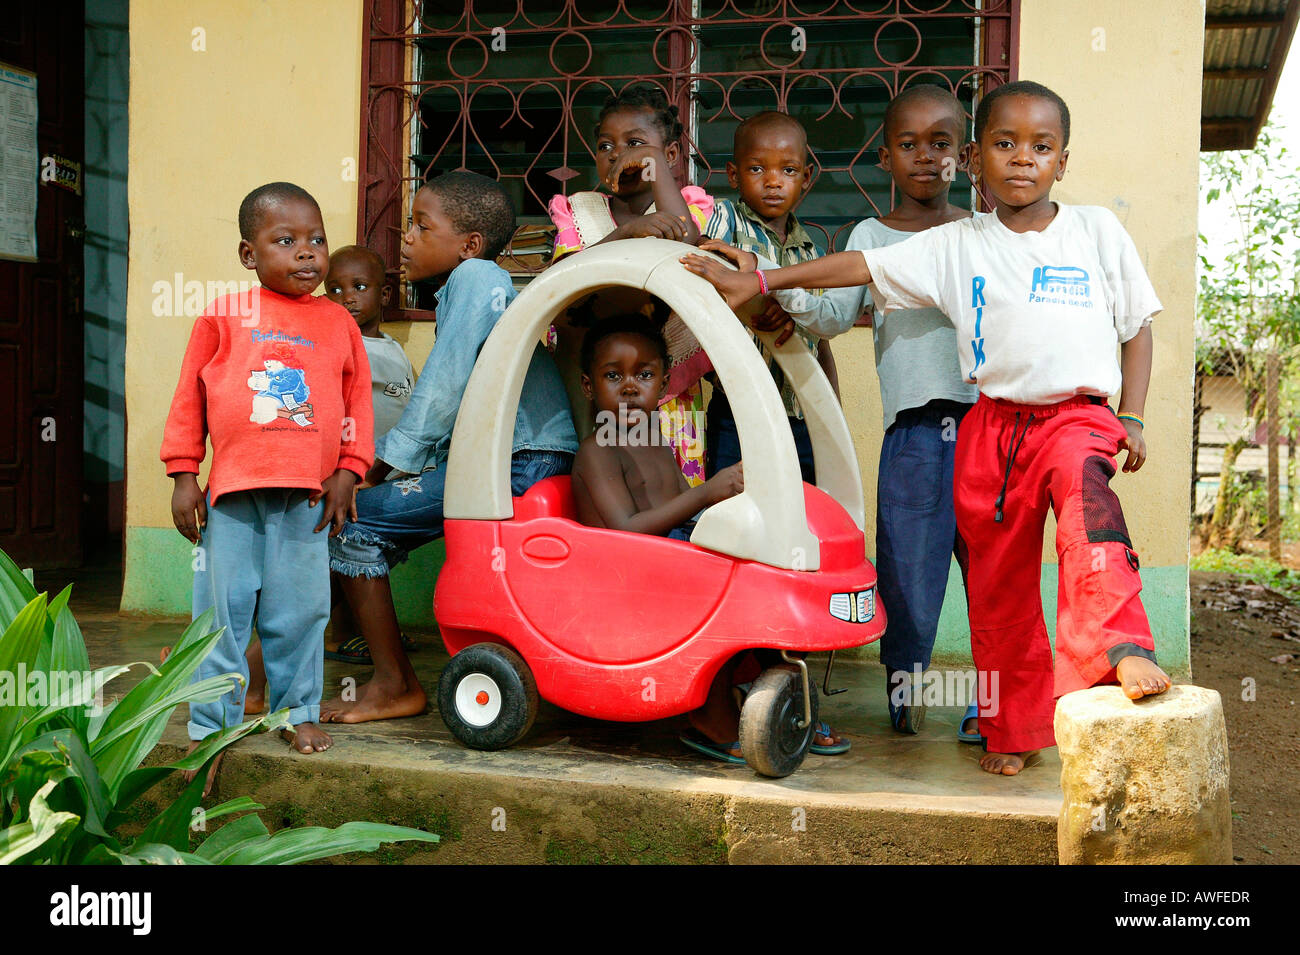 AIDS orphans at an orphanage, Cameroon, Africa Stock Photo